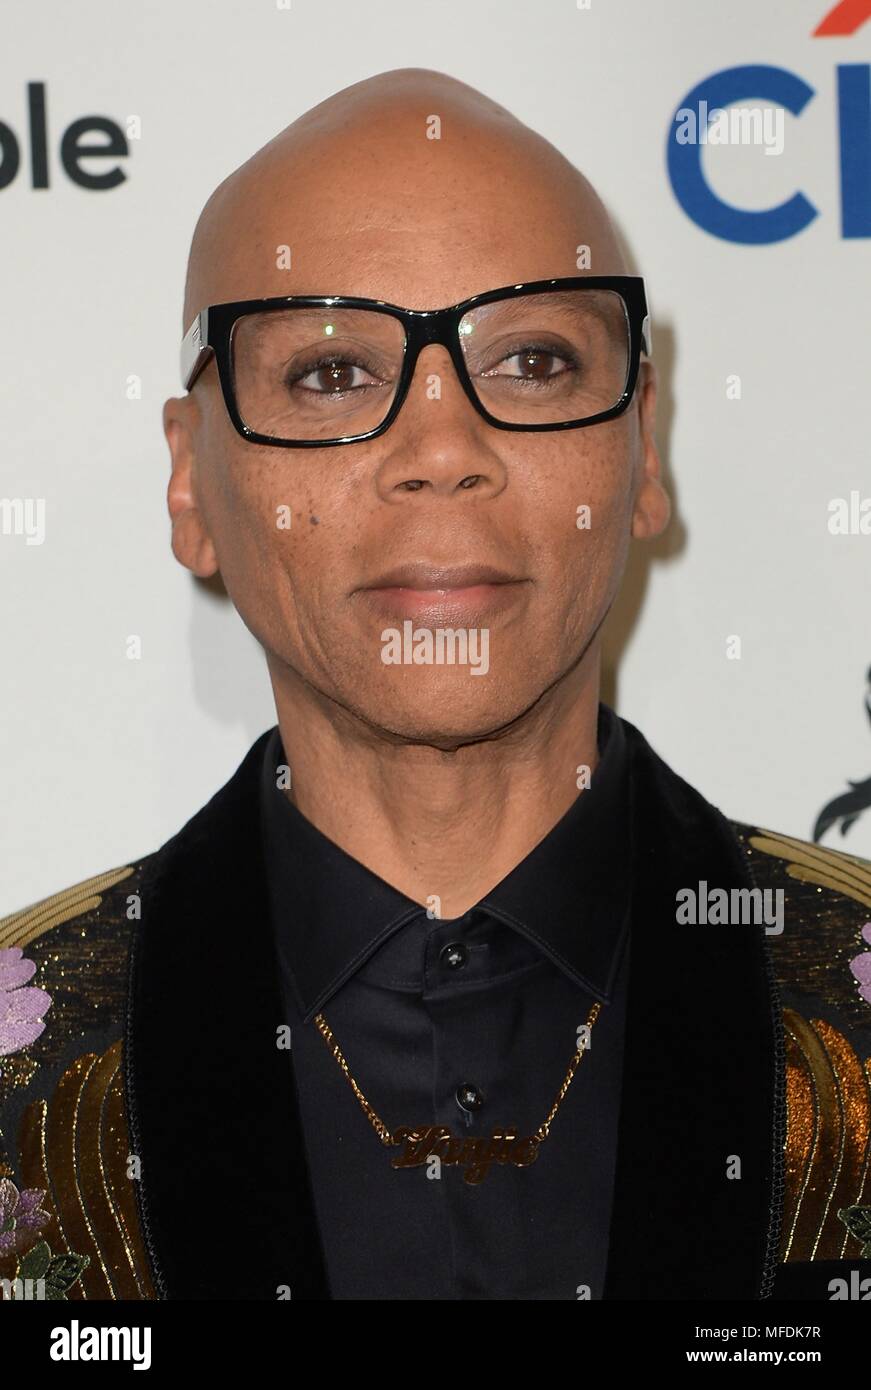 Rupaul at arrivals for TIME 100 Gala, Jazz at Lincoln Center's Frederick P. Rose Hall, New York, NY April 24, 2018. Photo By: Kristin Callahan/Everett Collection Stock Photo